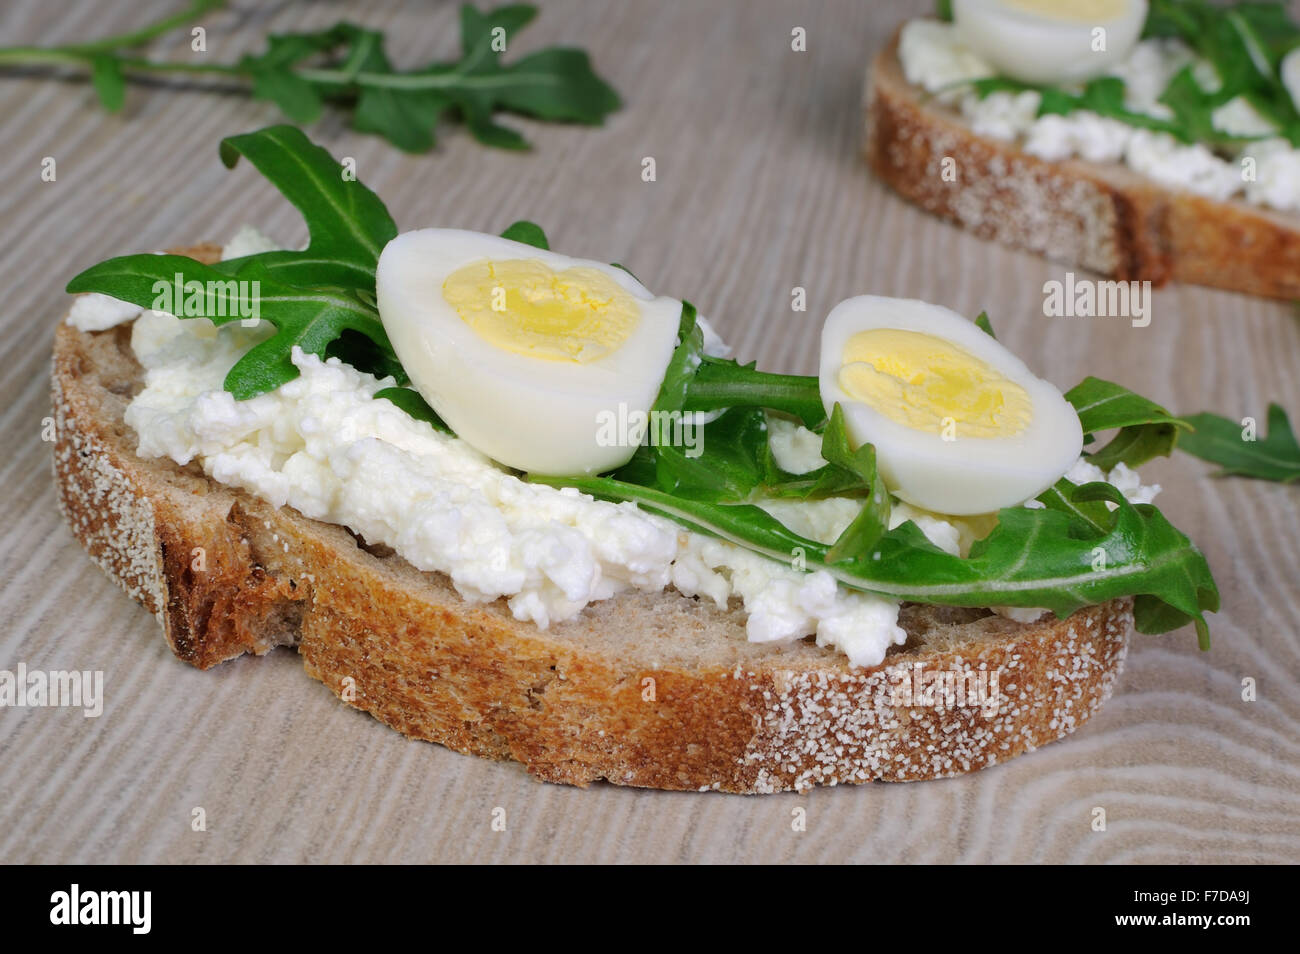 Sandwich with arugula and quail egg with leaves of arugula Stock Photo